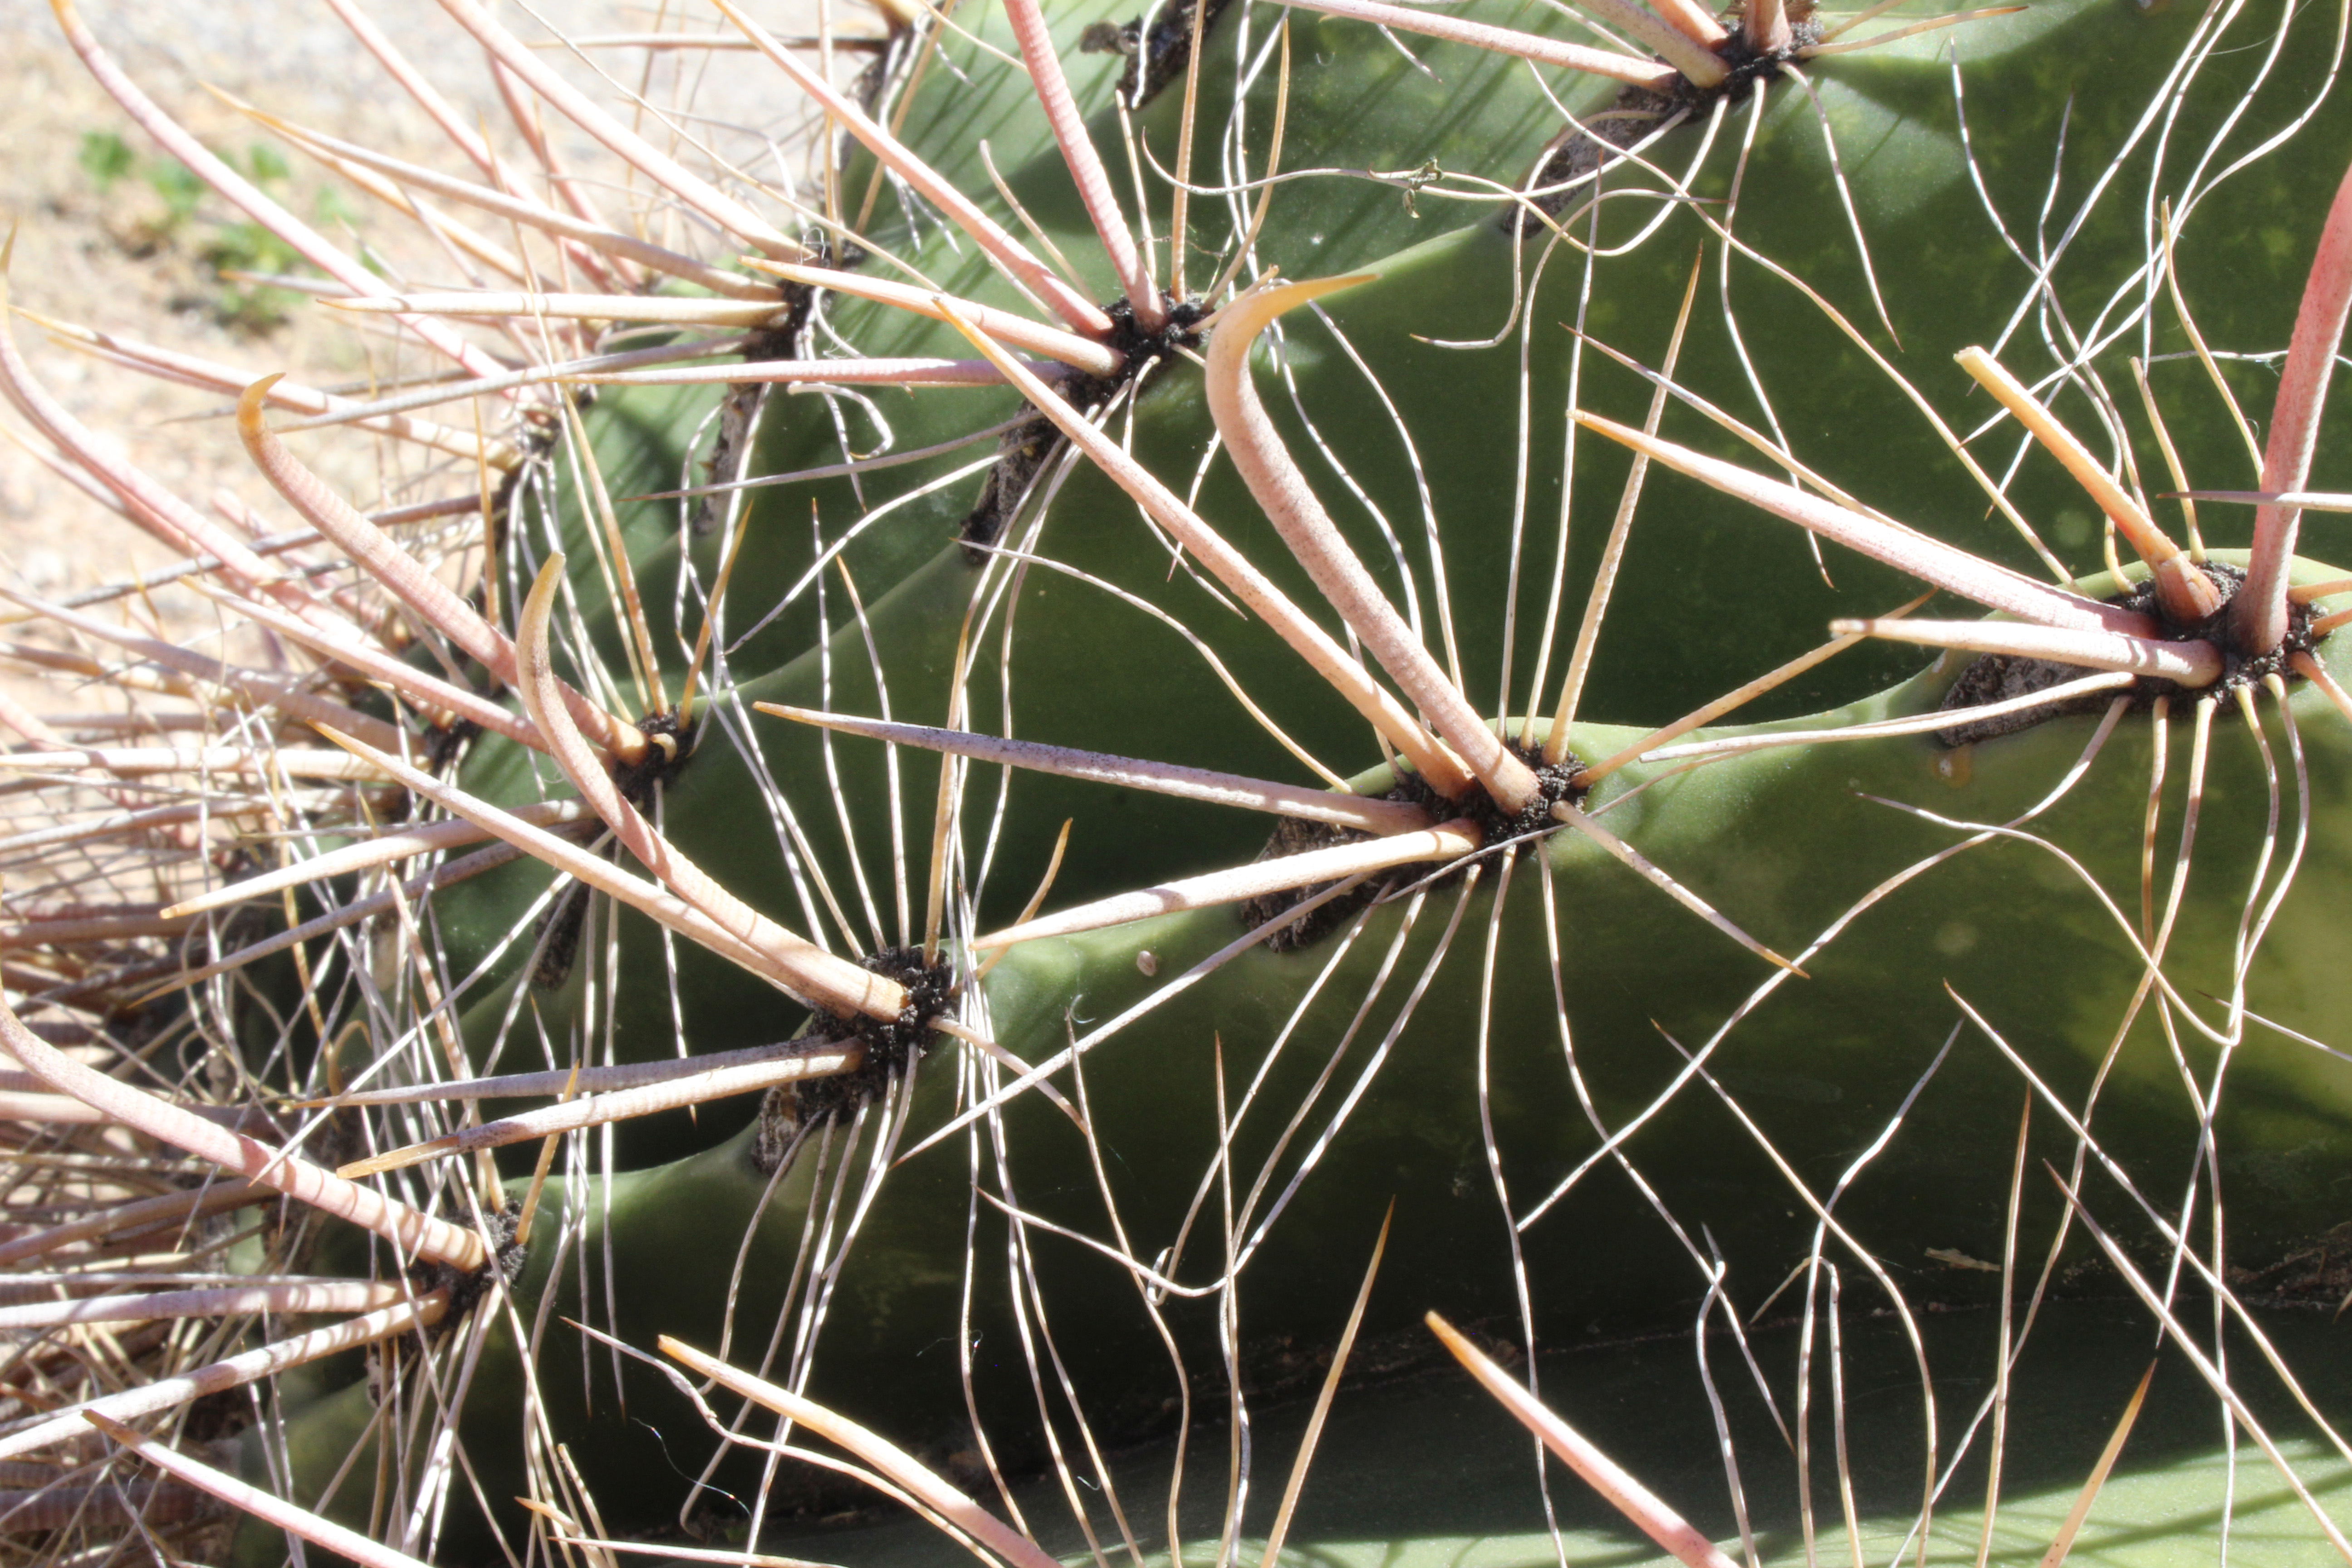 Photo by Iliana Toledo  |  A close up photo that is focused on a cactus and its spines.